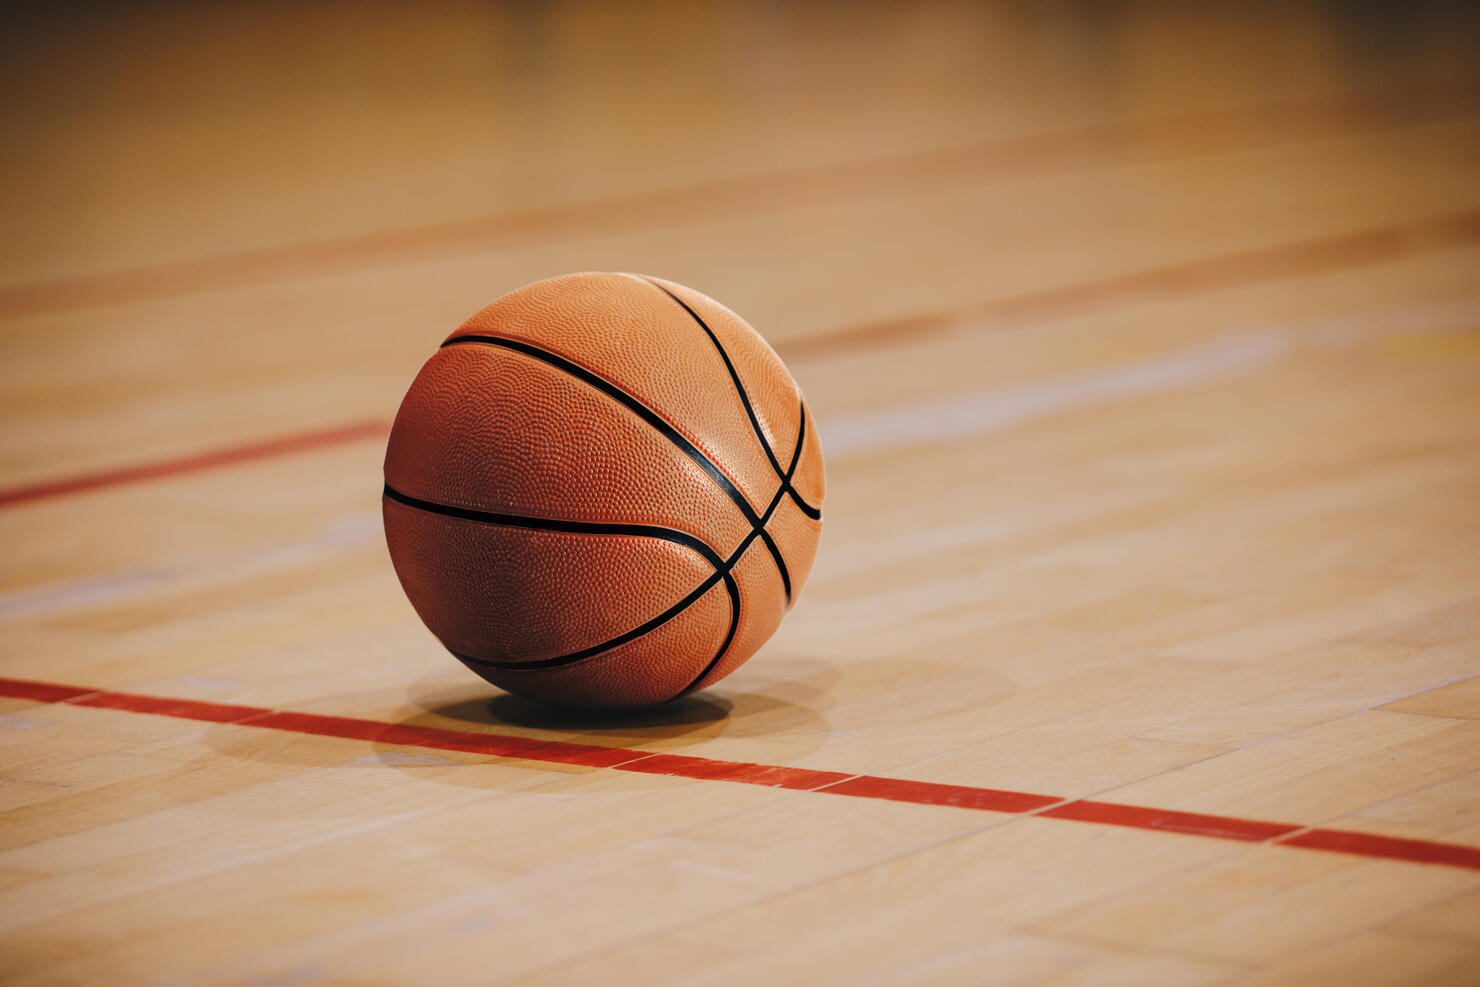 Classic Basketball on Wooden Court Floor Close Up with Blurred Arena in Background. Orange Ball on a Hardwood Basketball Court